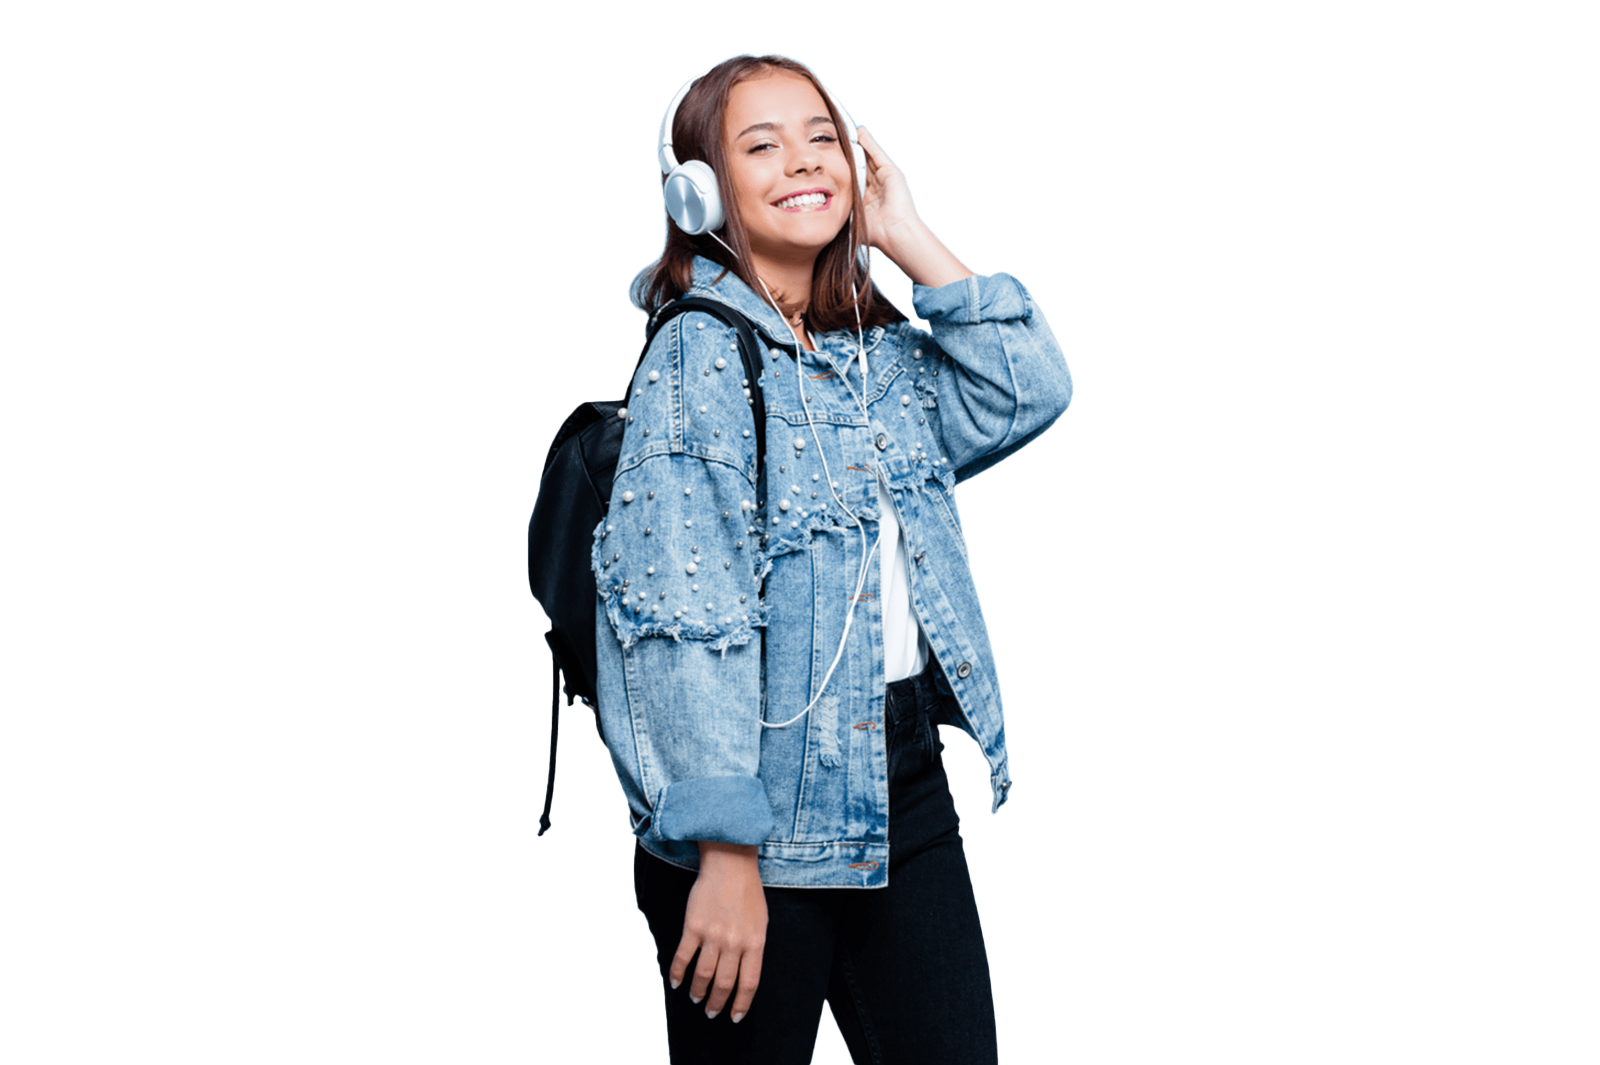 Smiling girl wearing headphones and wearing a backpack